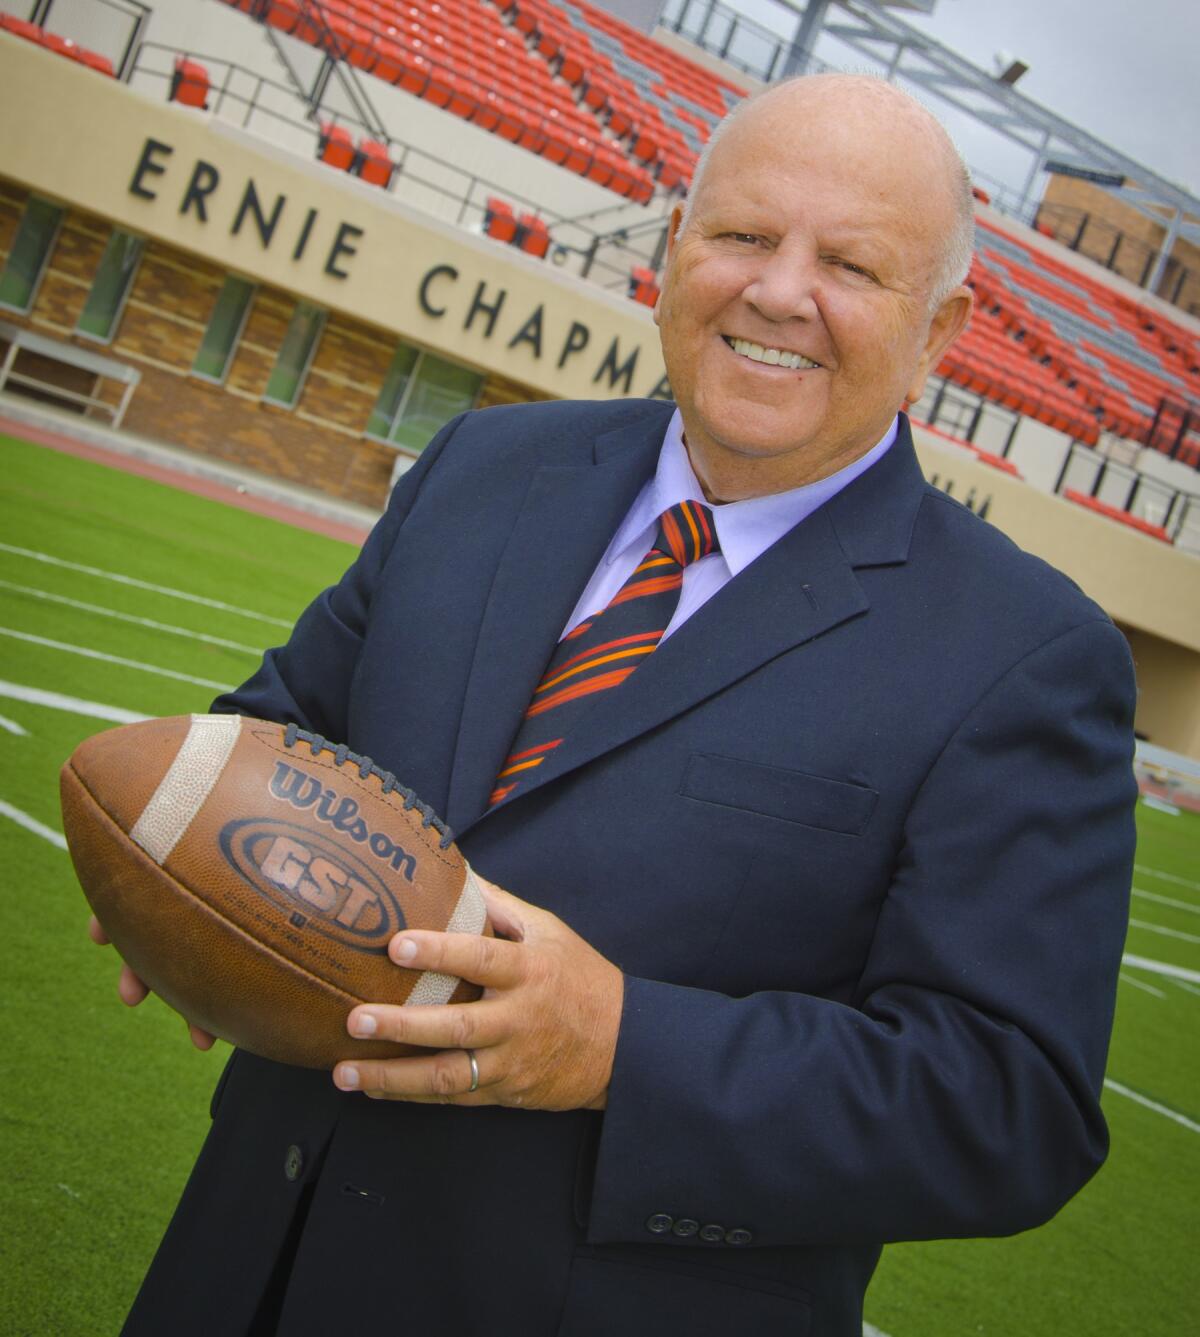 Longtime Chapman Universtiy athletic director Dave Currey holds a football while standing on the school's football field.